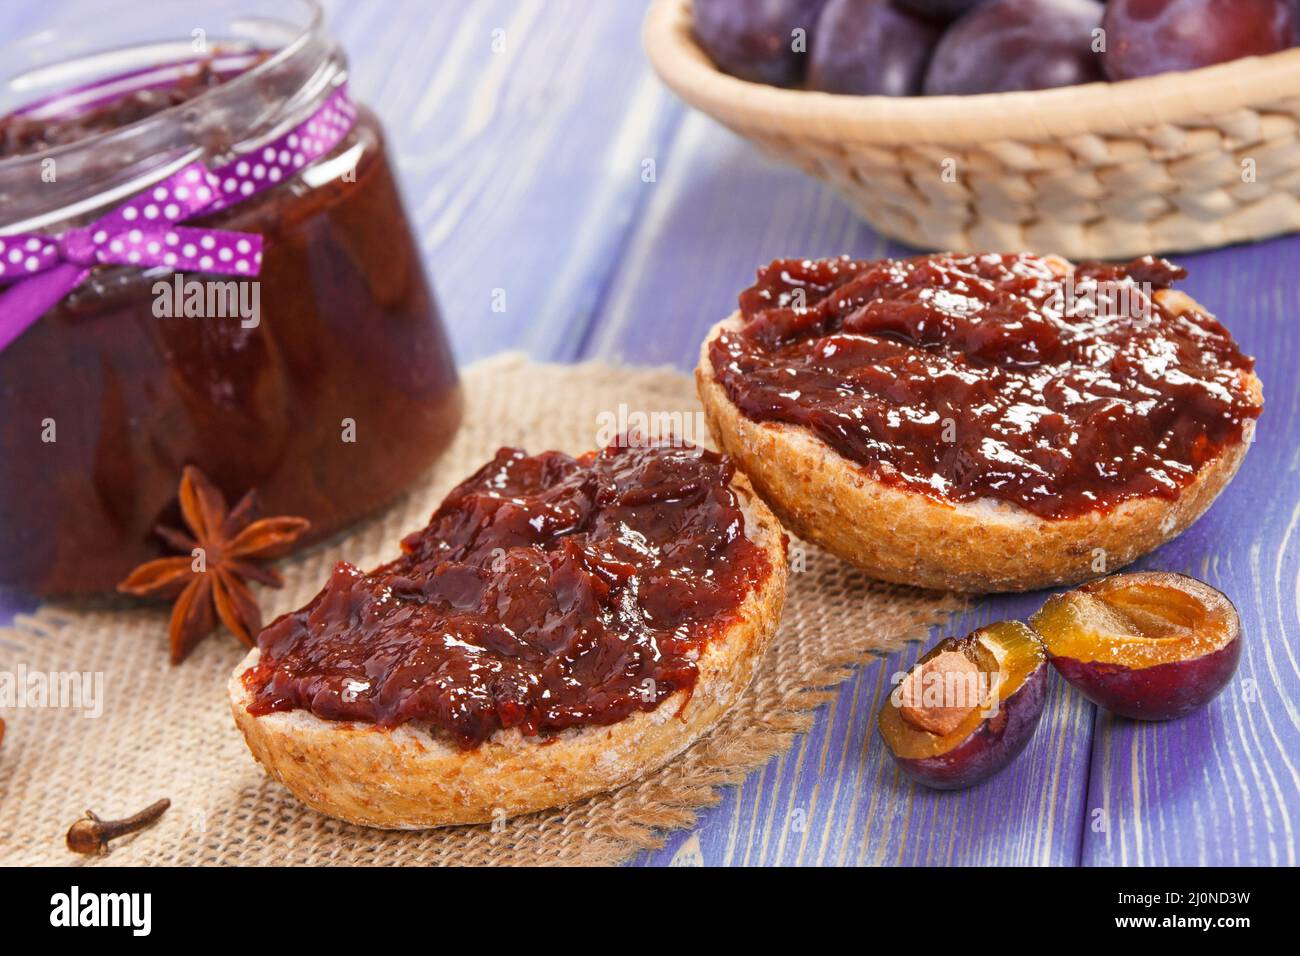 Fresh prepared sandwiches with plum marmalade or jam, concept of healthy sweet snack, breakfast or dessert Stock Photo